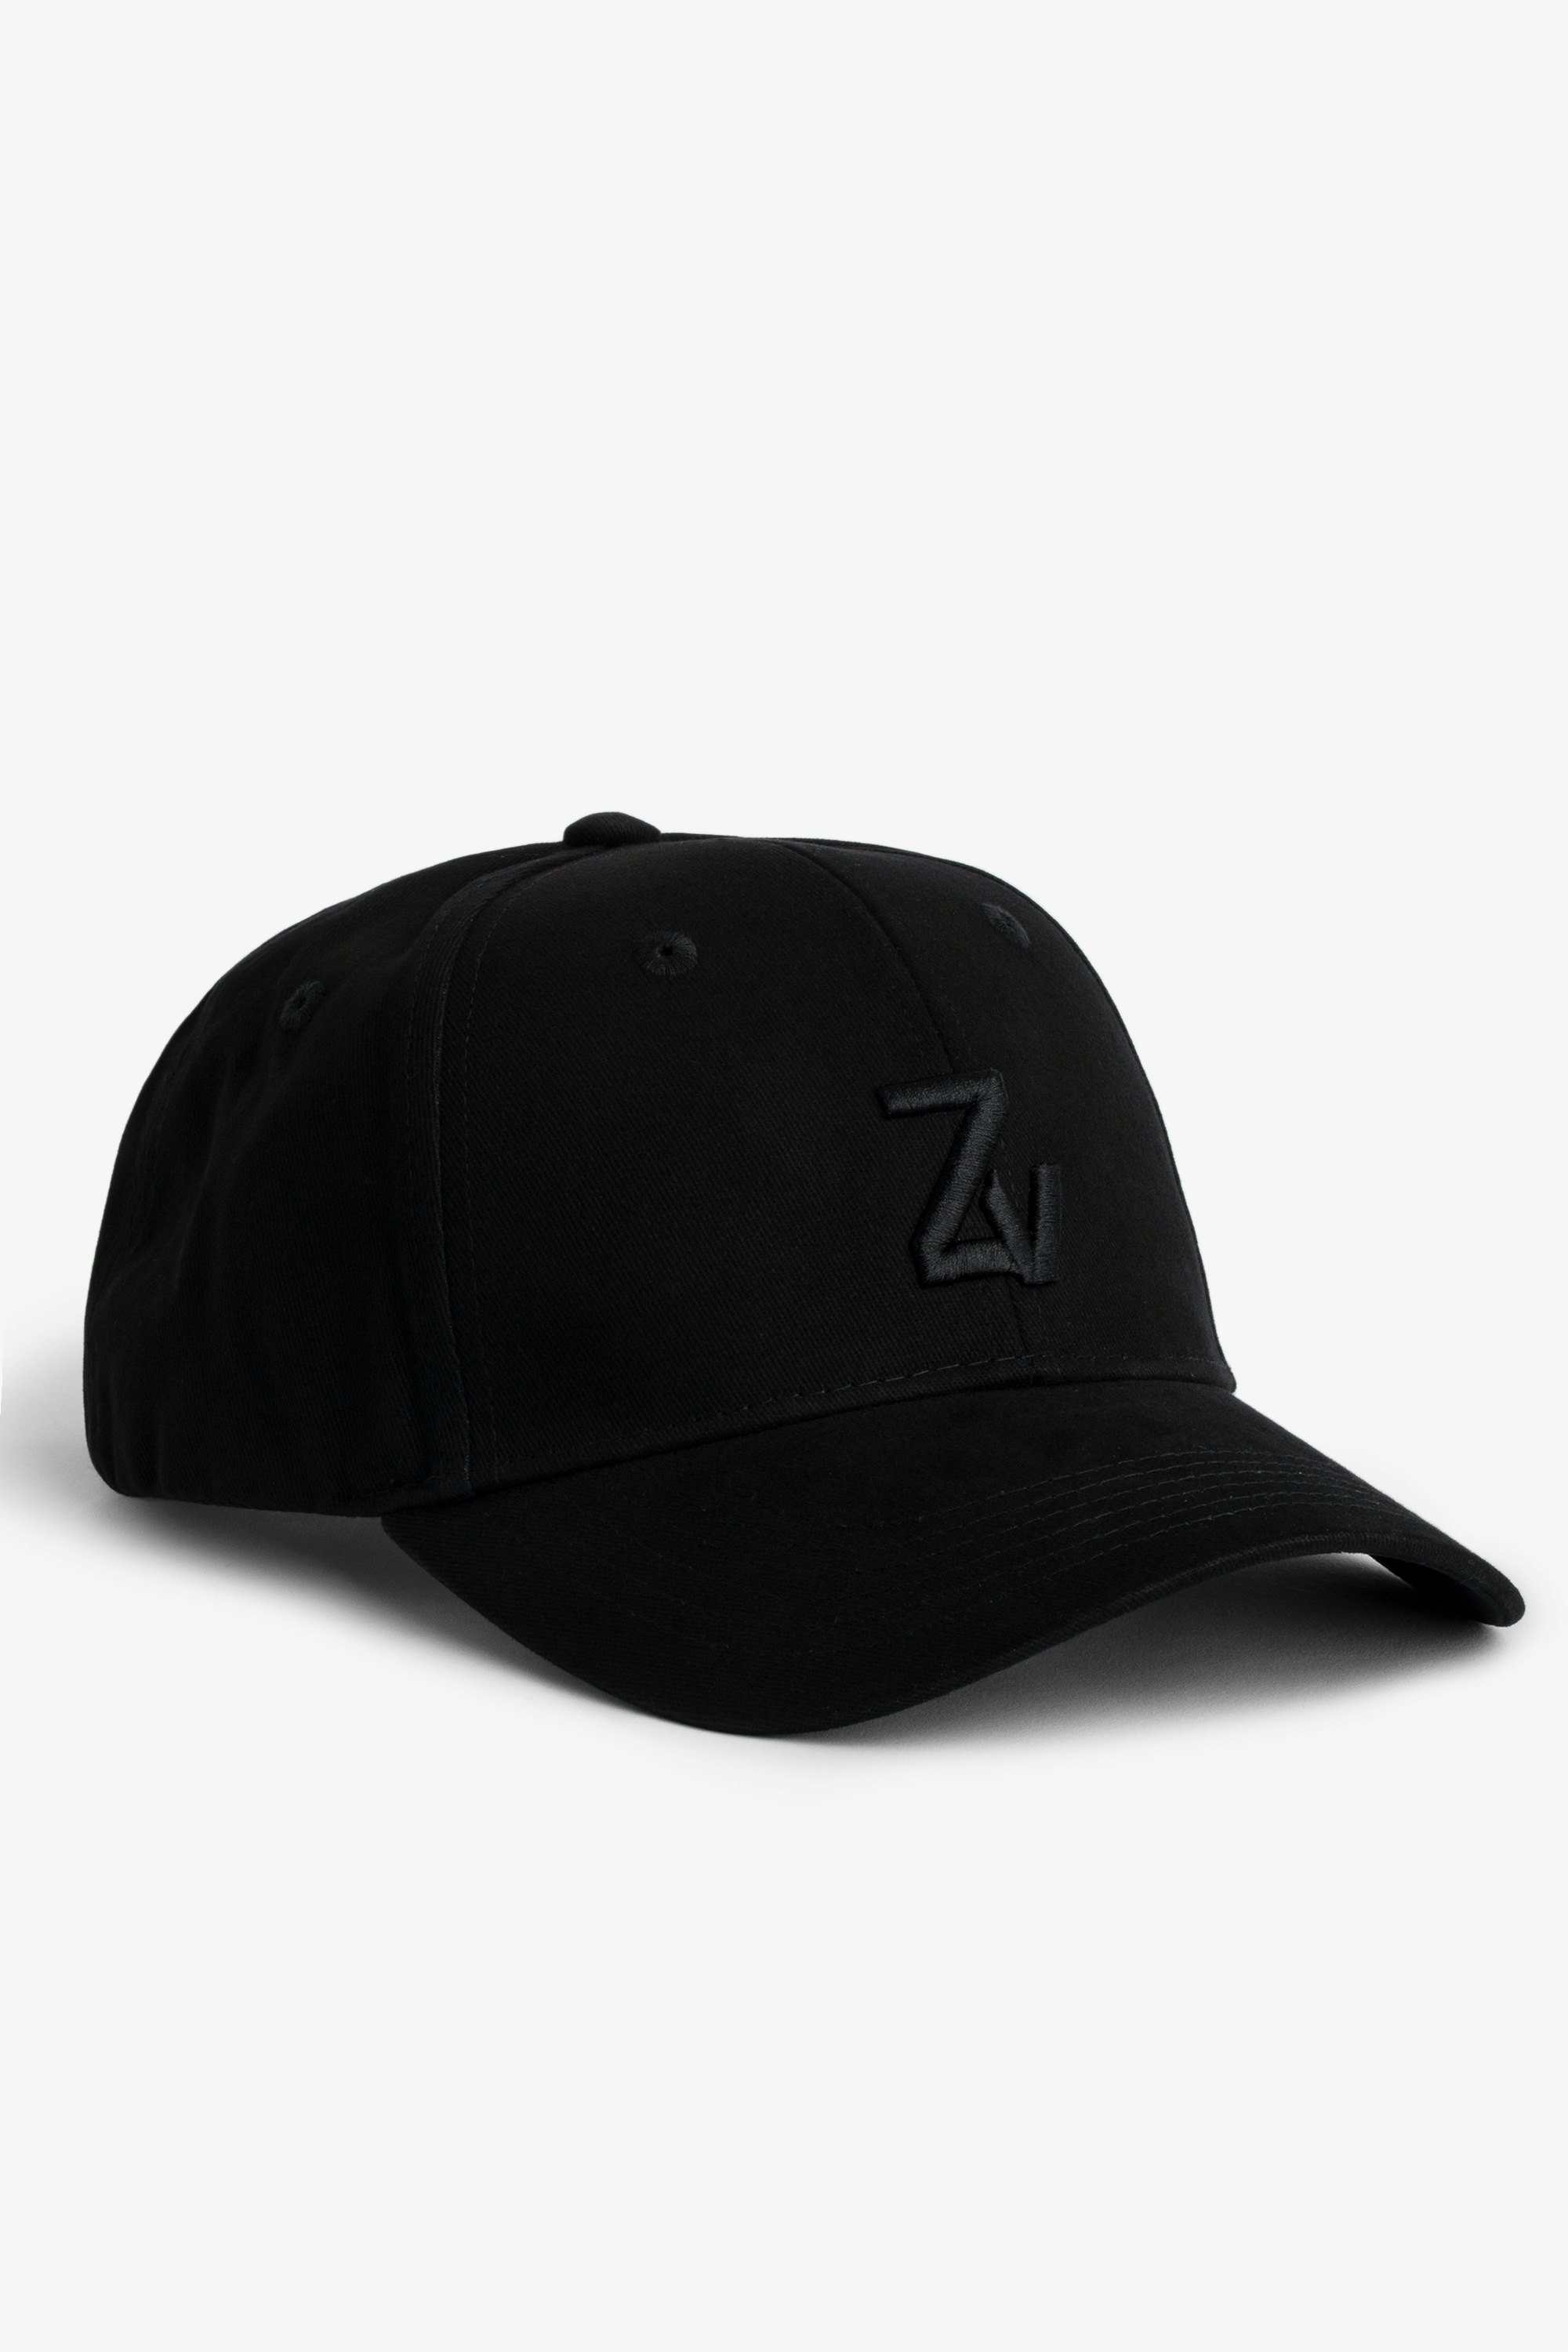 ZV Initiale Klelia キャップ - Cotton cap embroidered with the ZV initials.